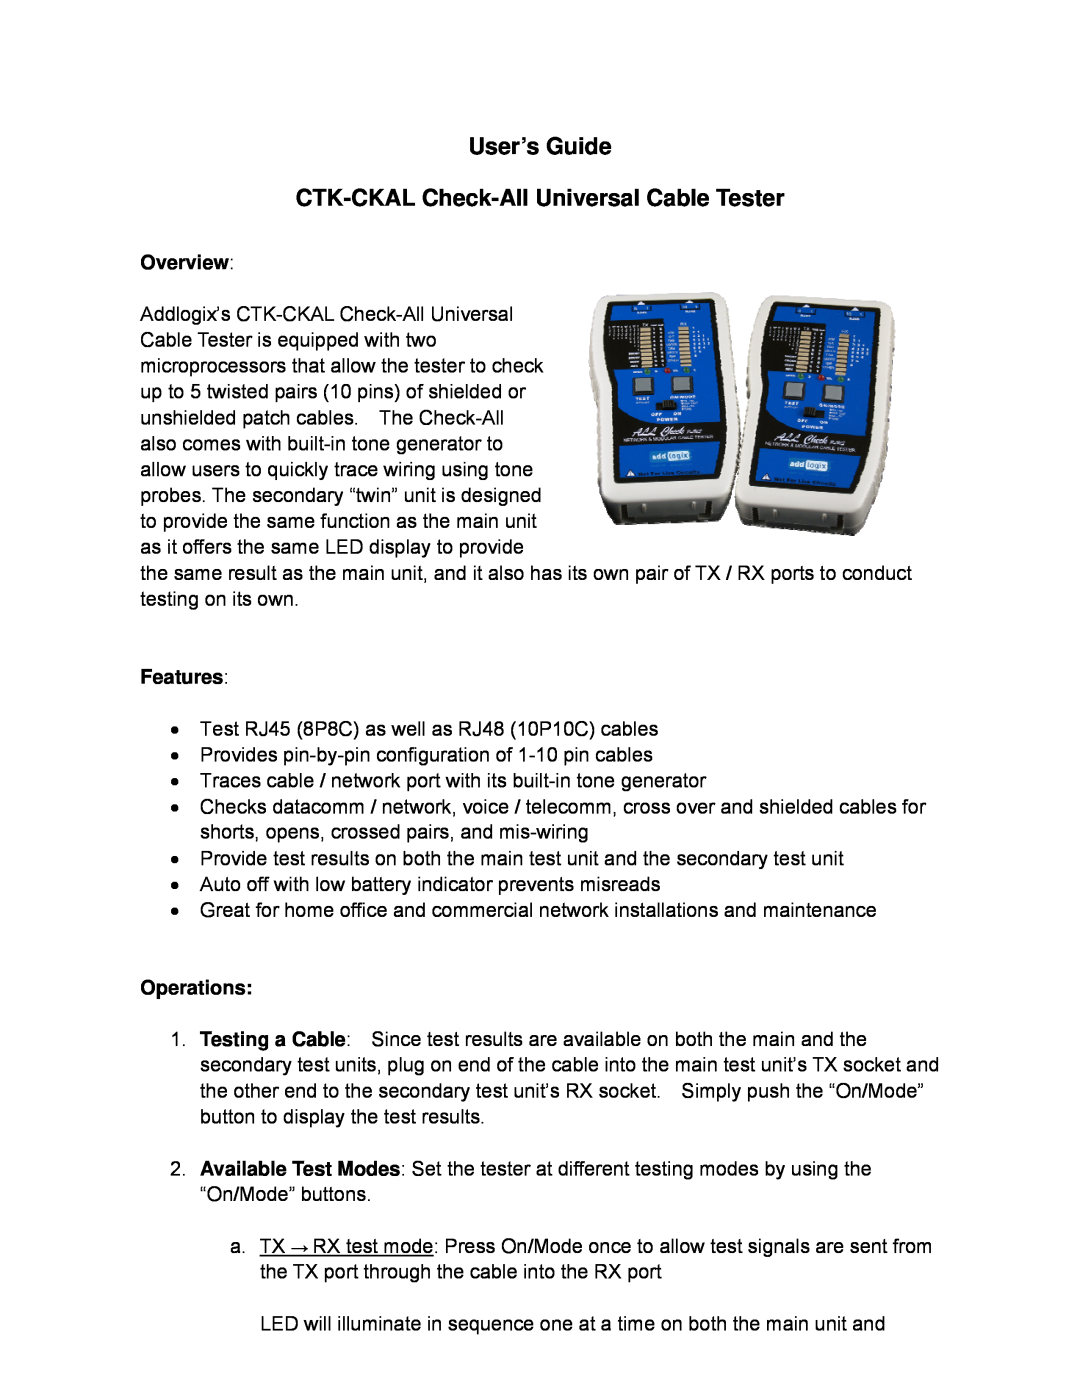 Addlogix manual Overview, Features, Operations, User’s Guide, CTK-CKAL Check-AllUniversal Cable Tester 